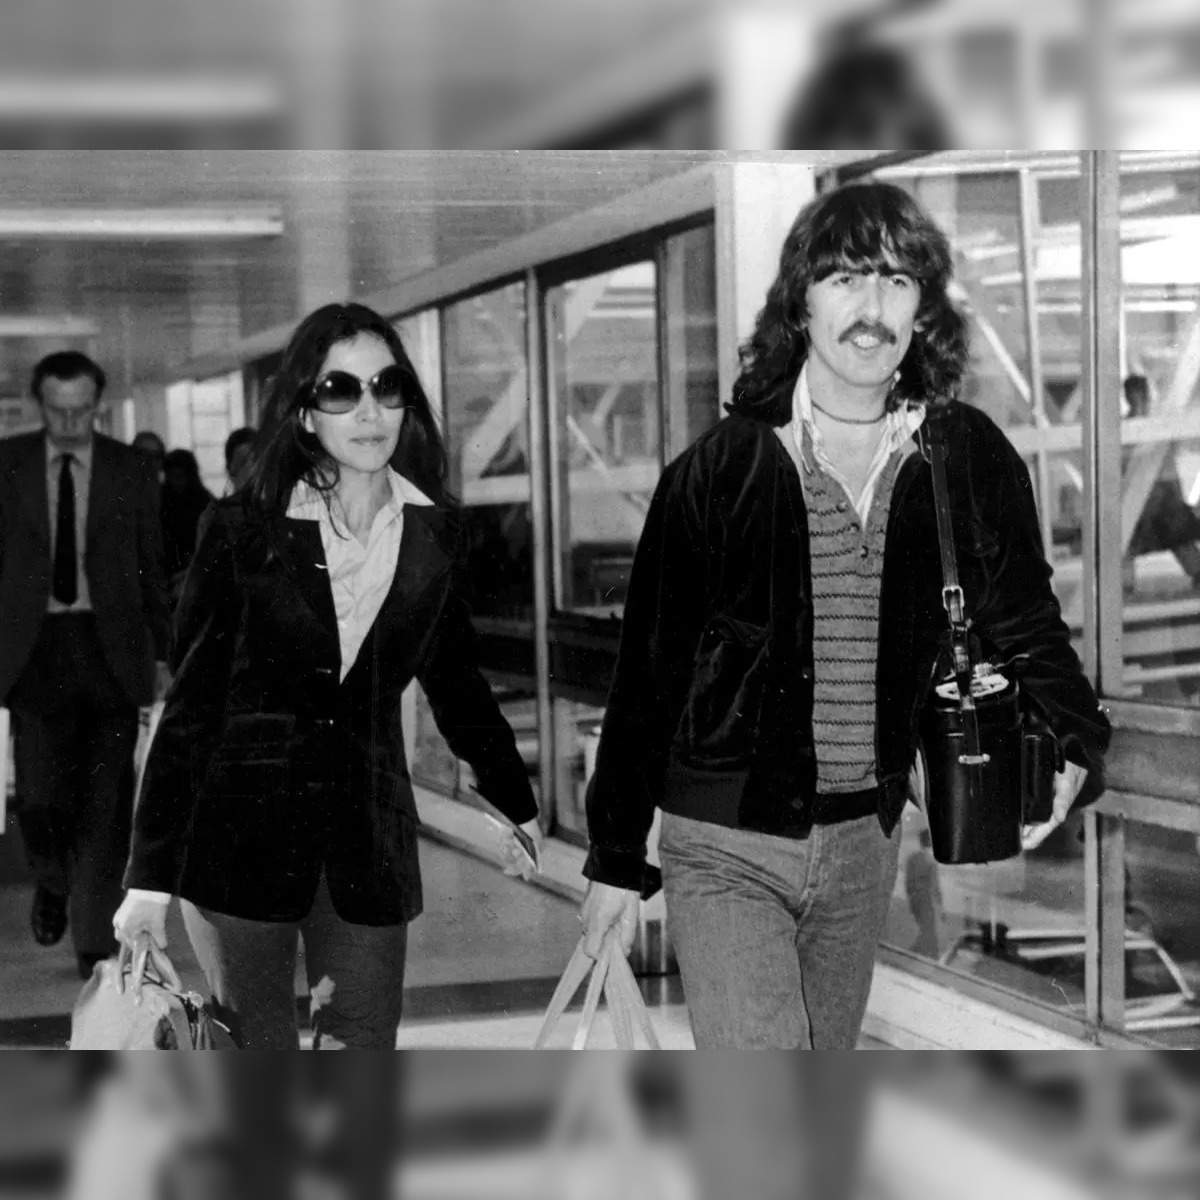 FLASHBACK: GEORGE HARRISON BECOMES THE FIRST SOLO BEATLE TO TOUR